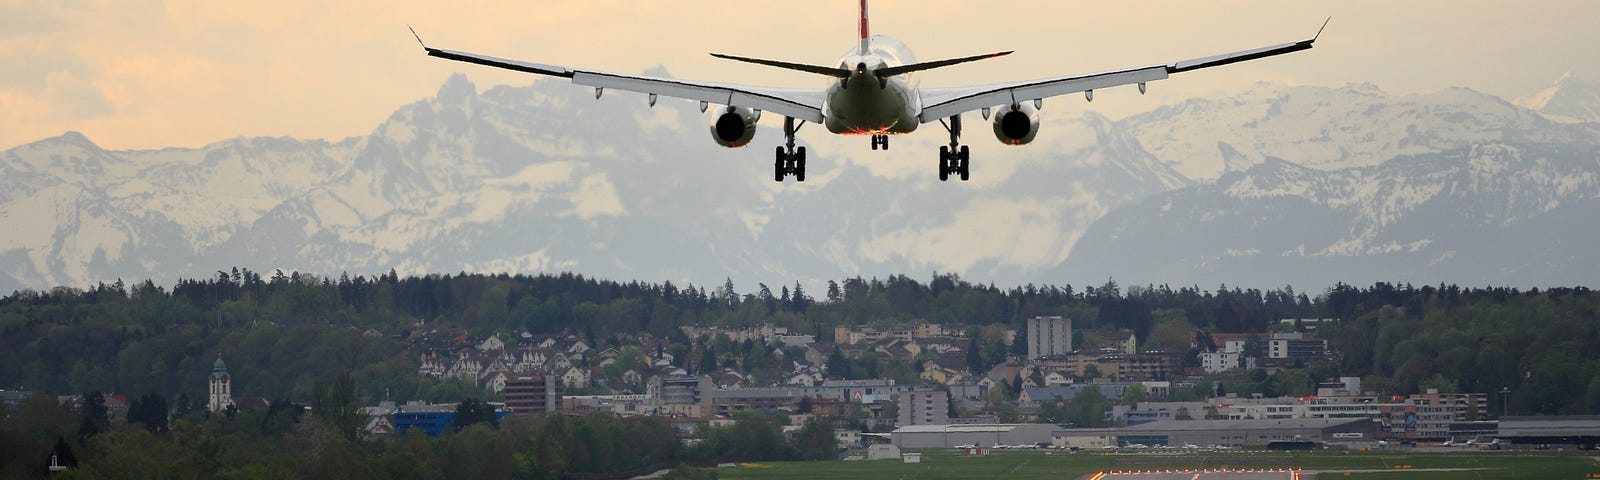 A plane landing not yet set down on the tarmac, runway lights are lit and there is a mountain range in the background.